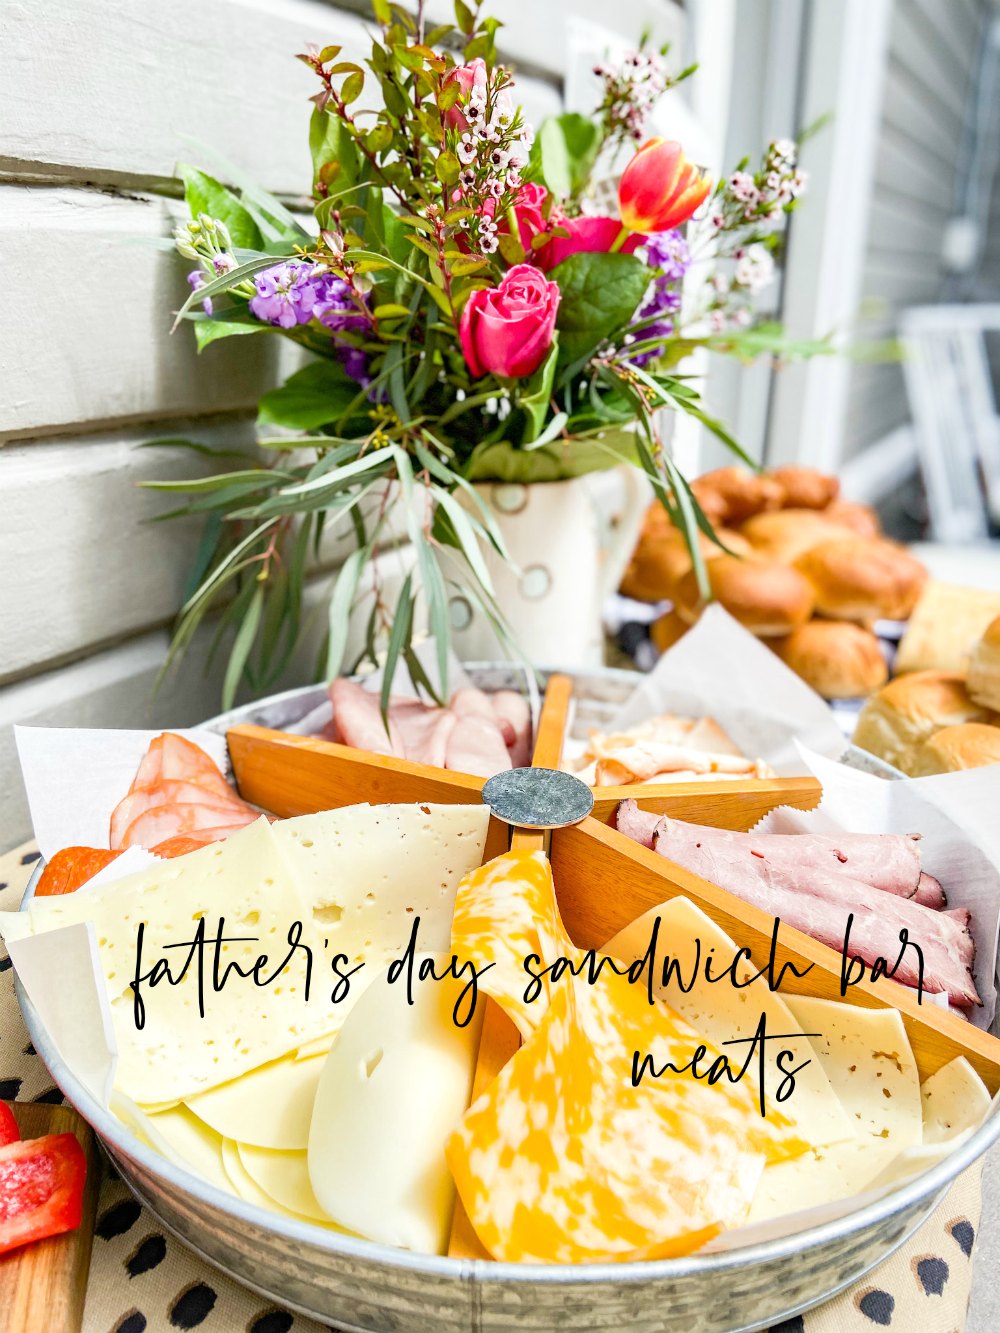 Father's Day Sandwich Bar. Celebrate dad with the ultimate sandwich celebration. Lots of bread options, cheeses, veggies and meats let everyone create their version of the PERFECT sandwich. Dad will love it! 